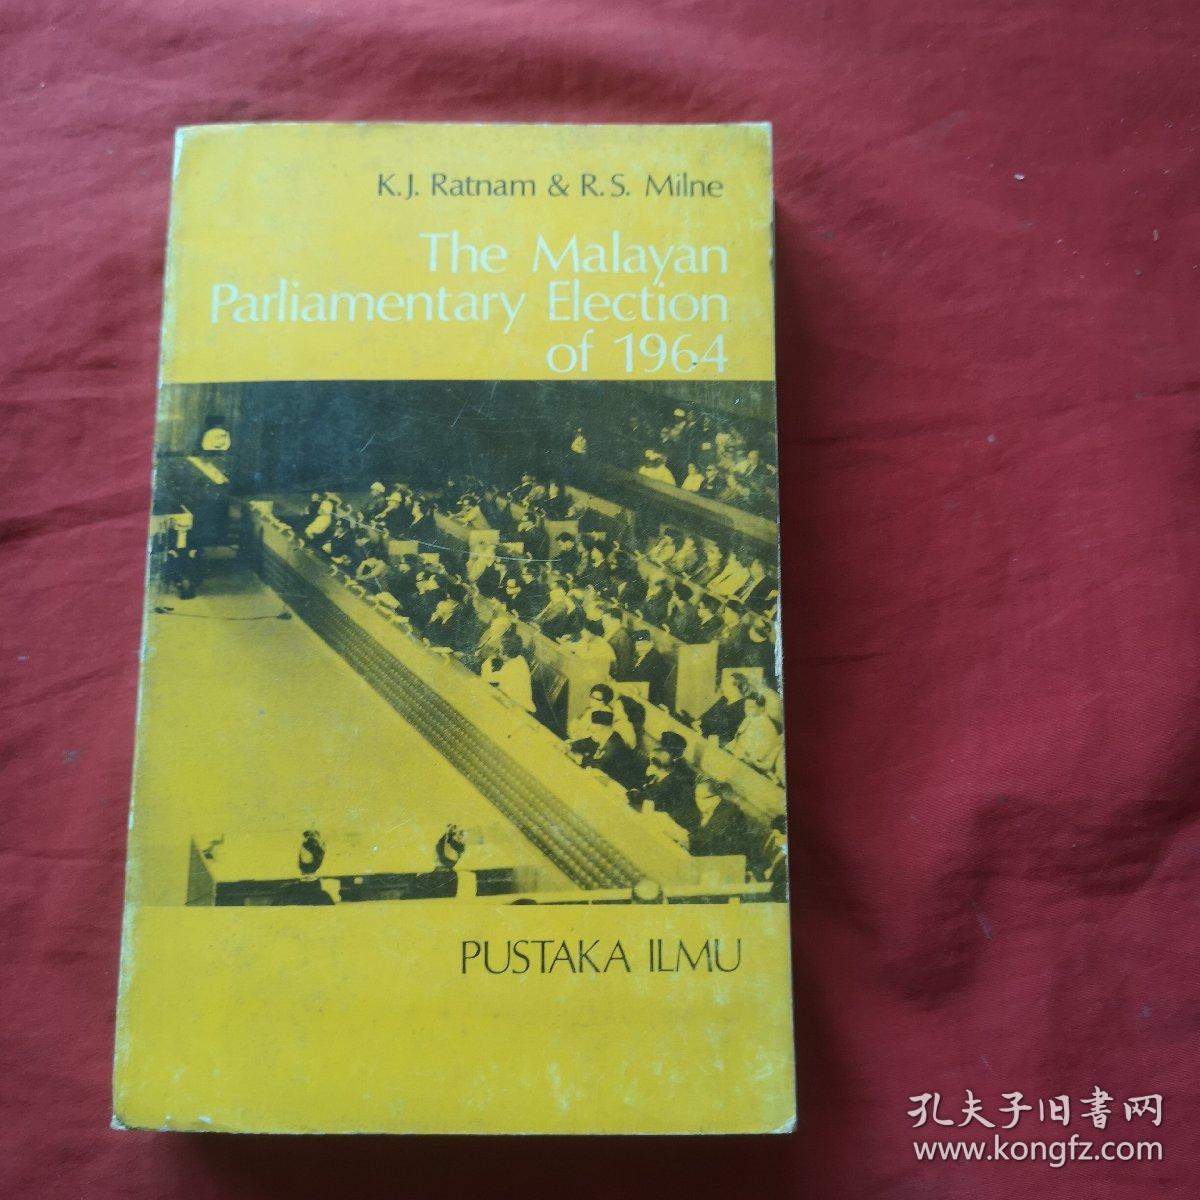 The Malayan Parliamentary Election of 1964